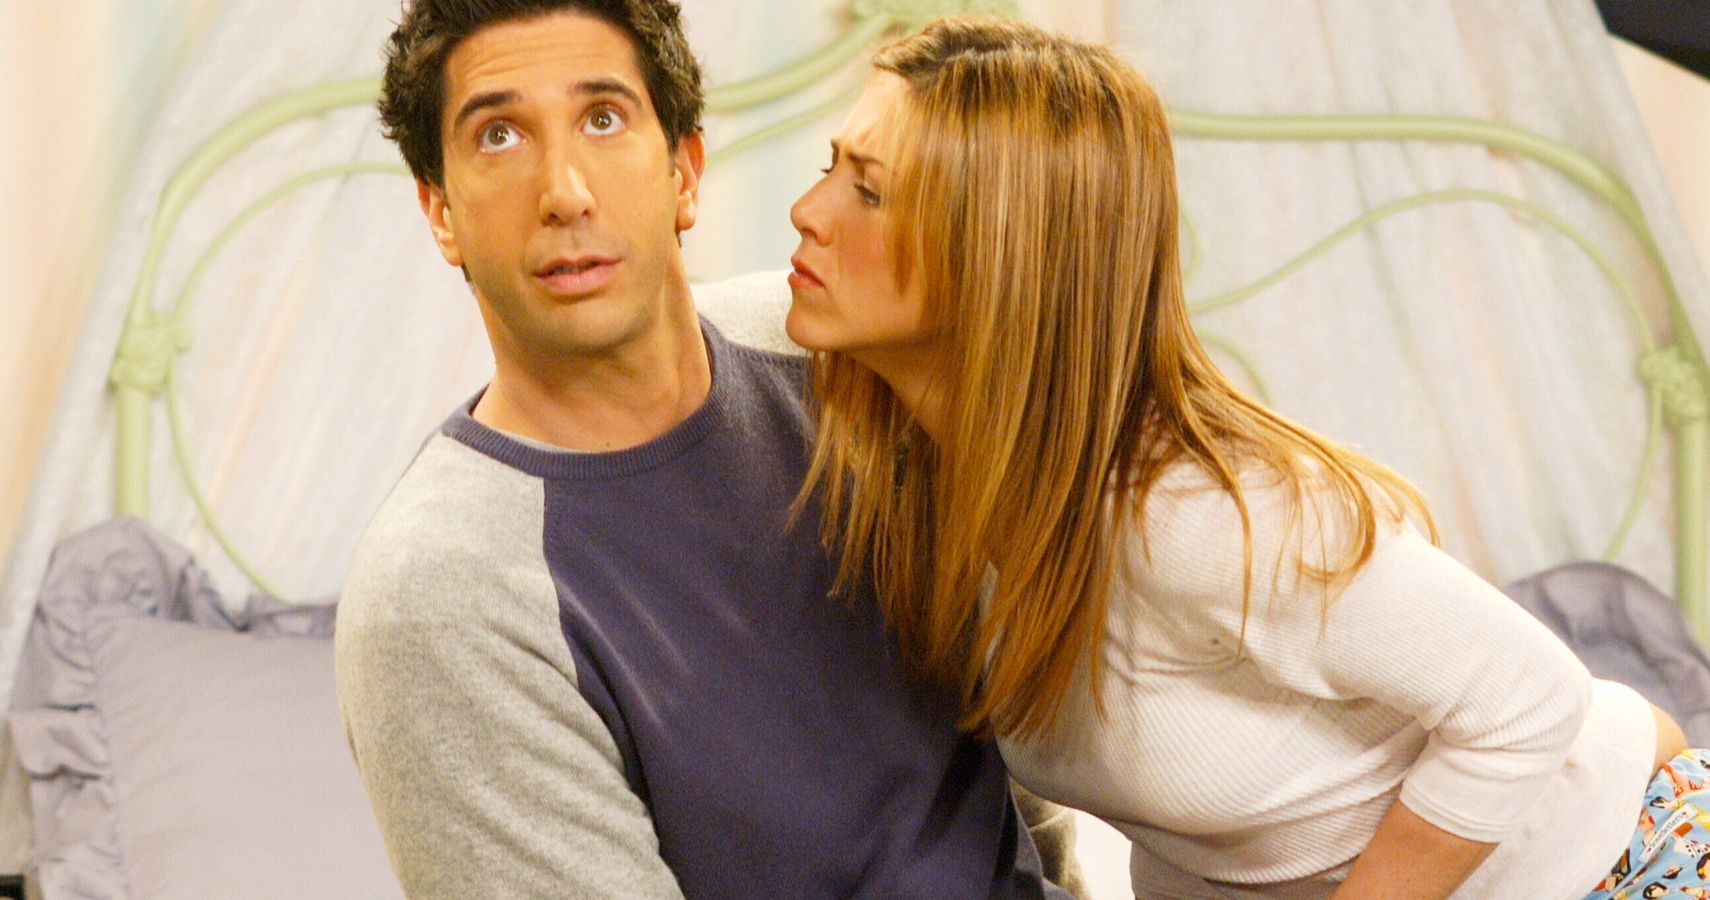 Friends: The 15 Most Hilarious Quotes From Ross Geller